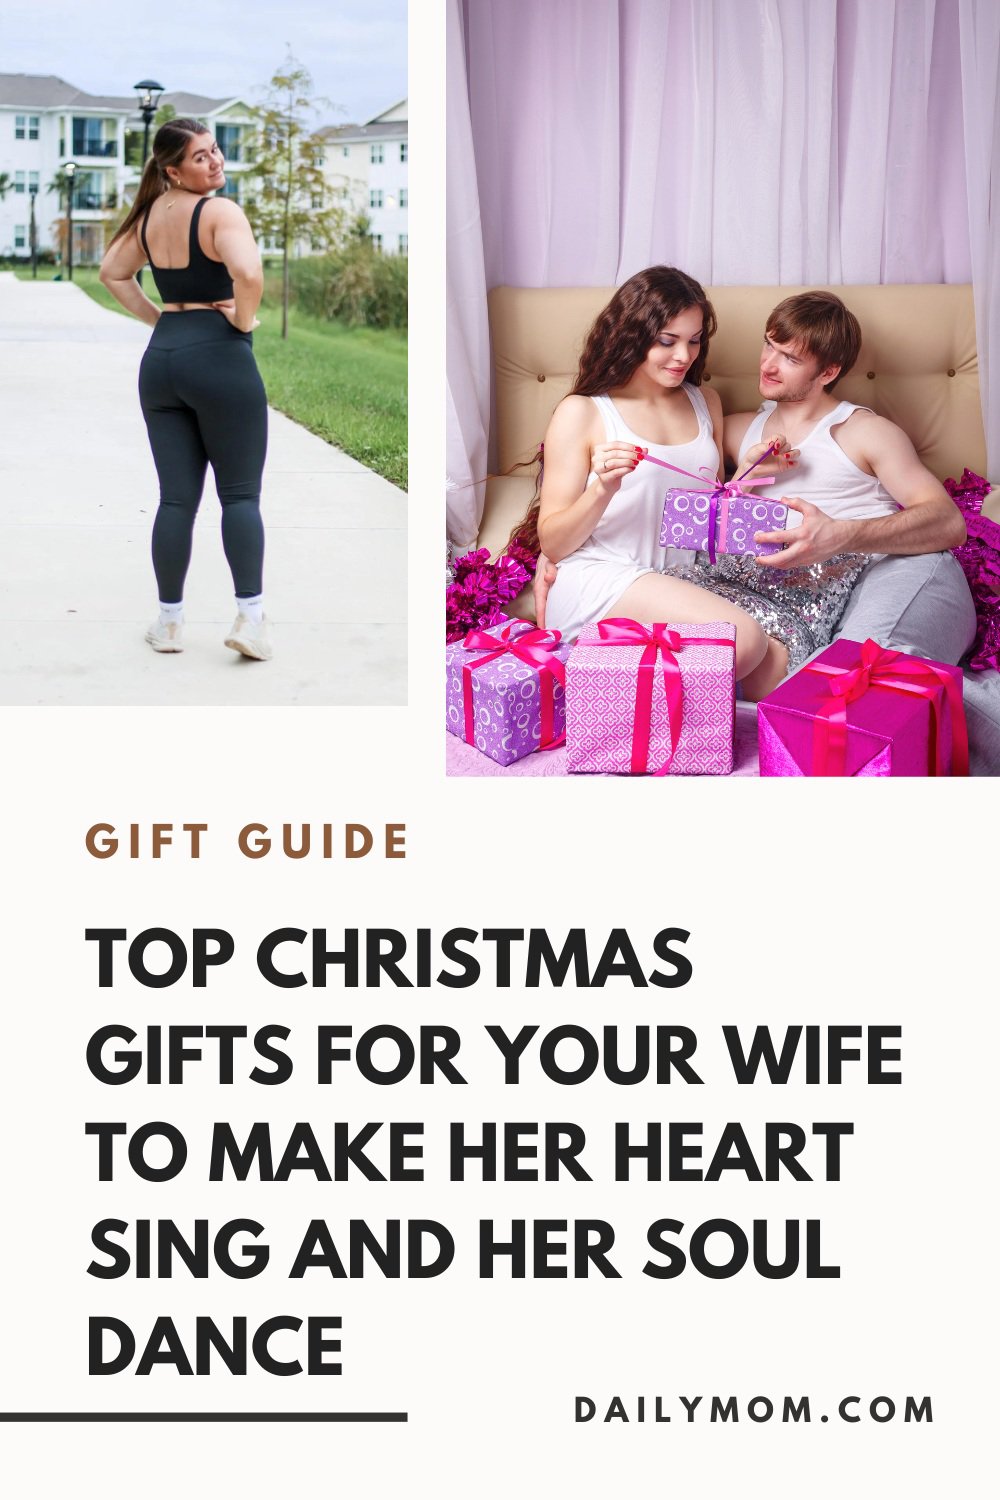 21 Top Christmas Gifts For Your Wife To Make Her Heart Sing And Her Soul Dance 73 Daily Mom, Magazine For Families